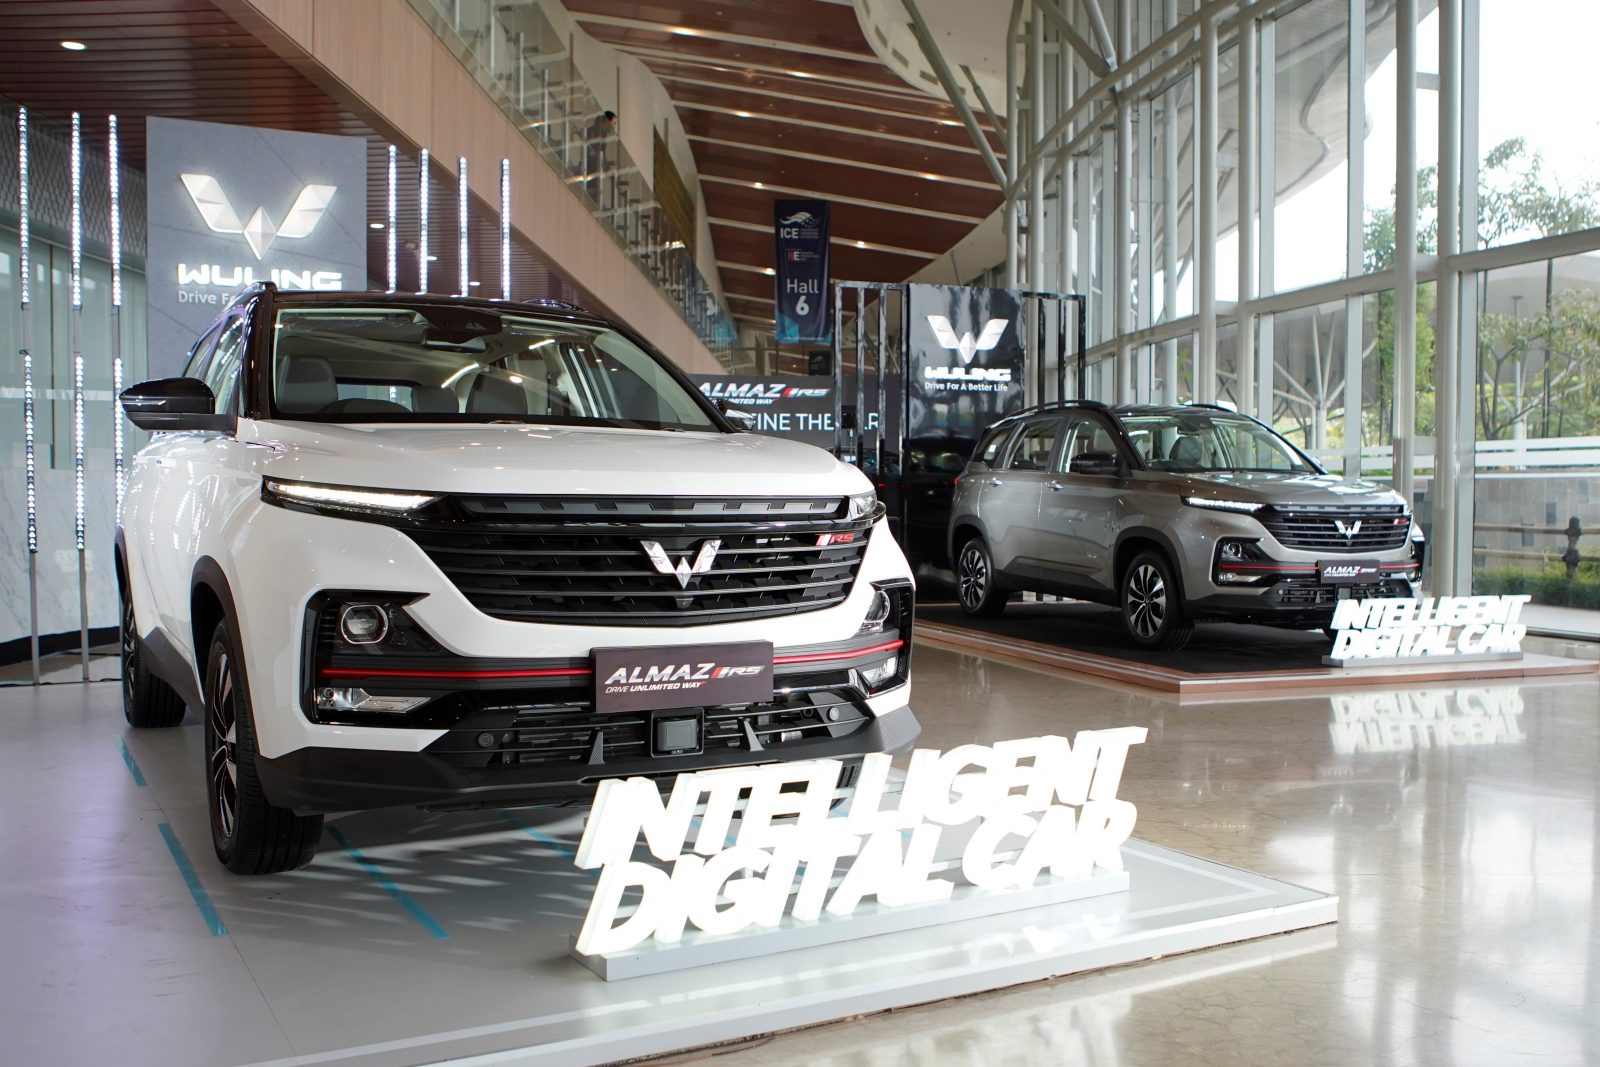 Image Wuling Announced Its Products Prices Adjusted to PPnBM Subsidy Extension Plan